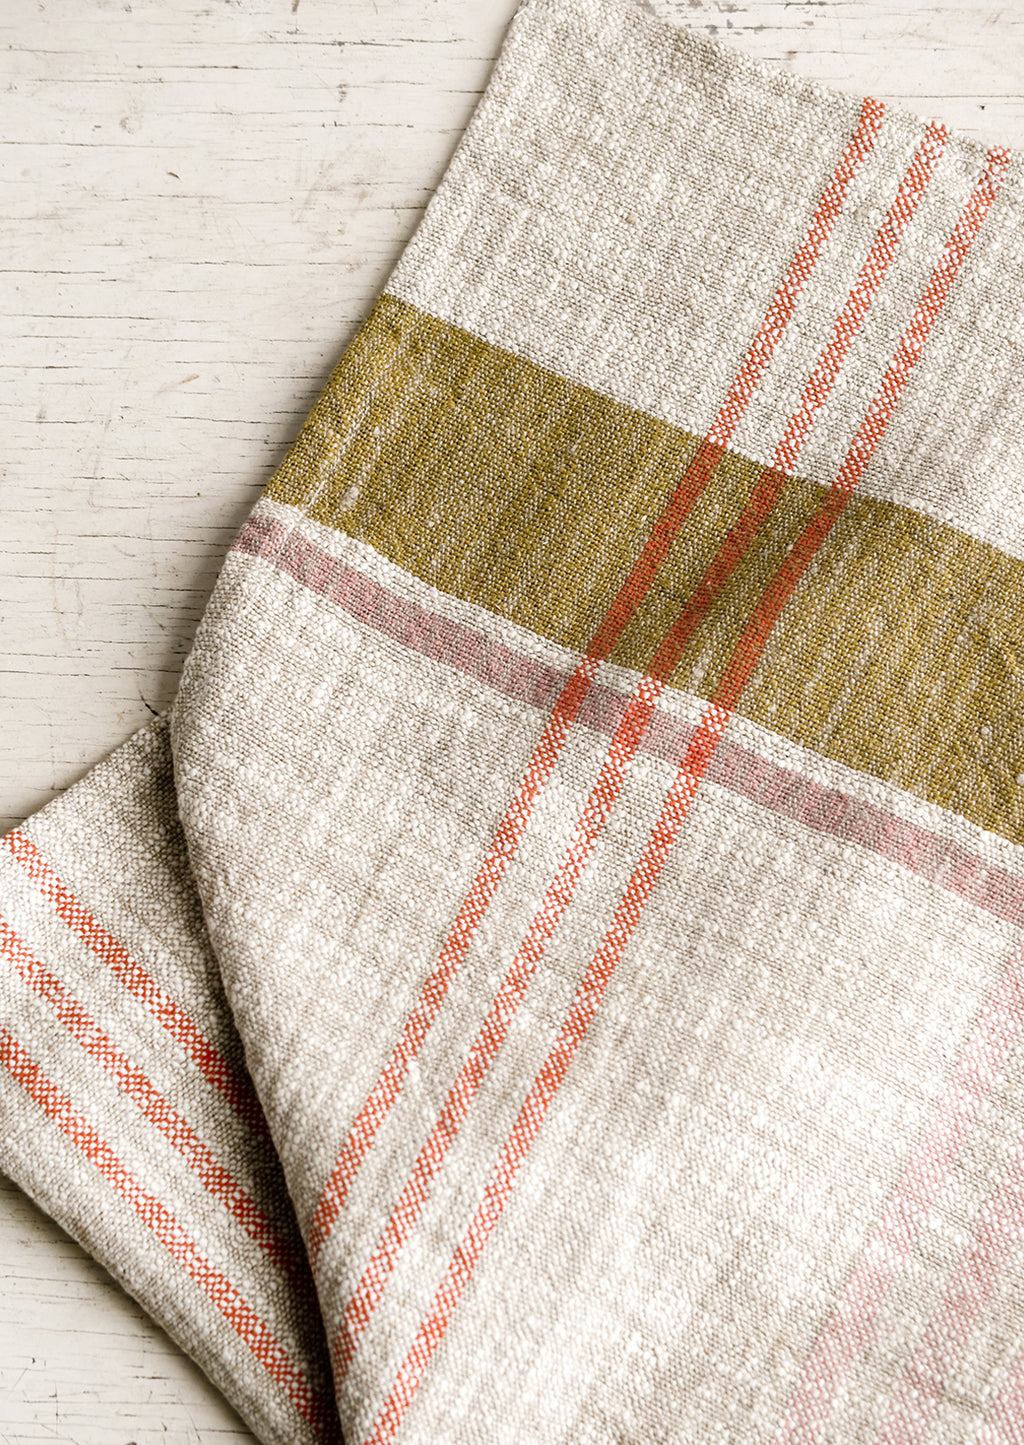 1: A natural tea towel with orange, ochre and pink plaid pattern.